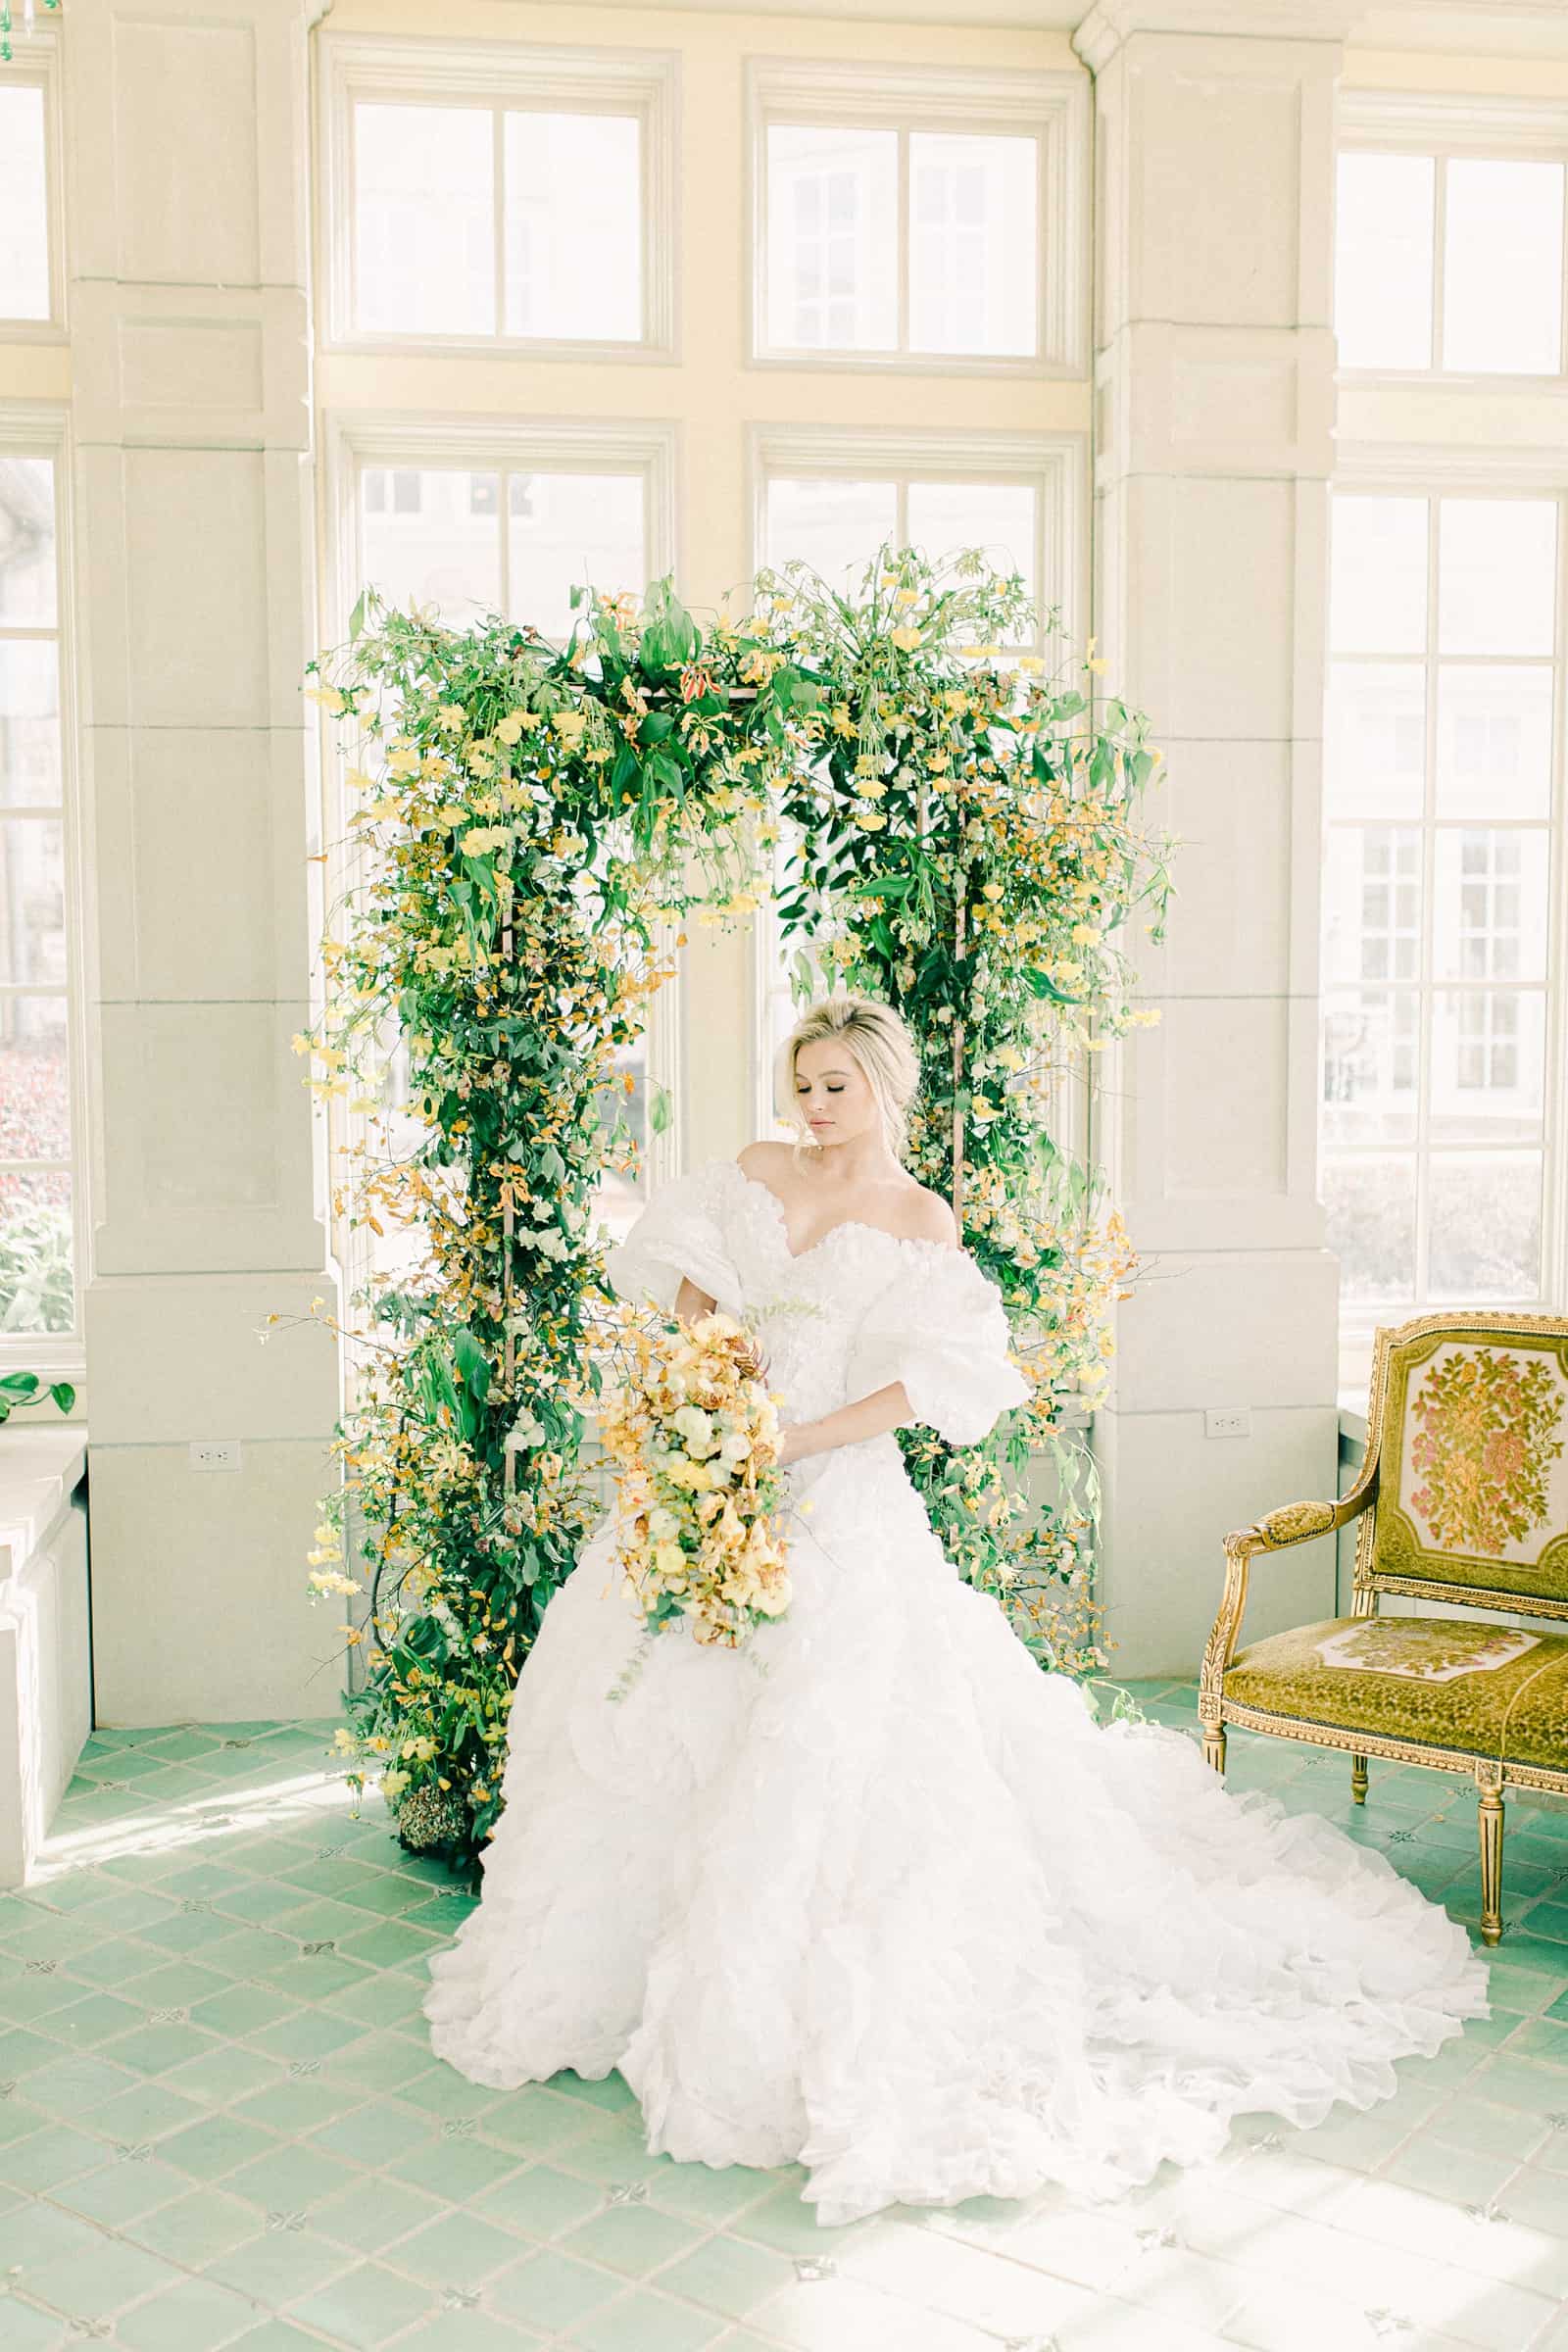 Bride wearing off shoulder ball gown with puff sleeves in front of floral arch